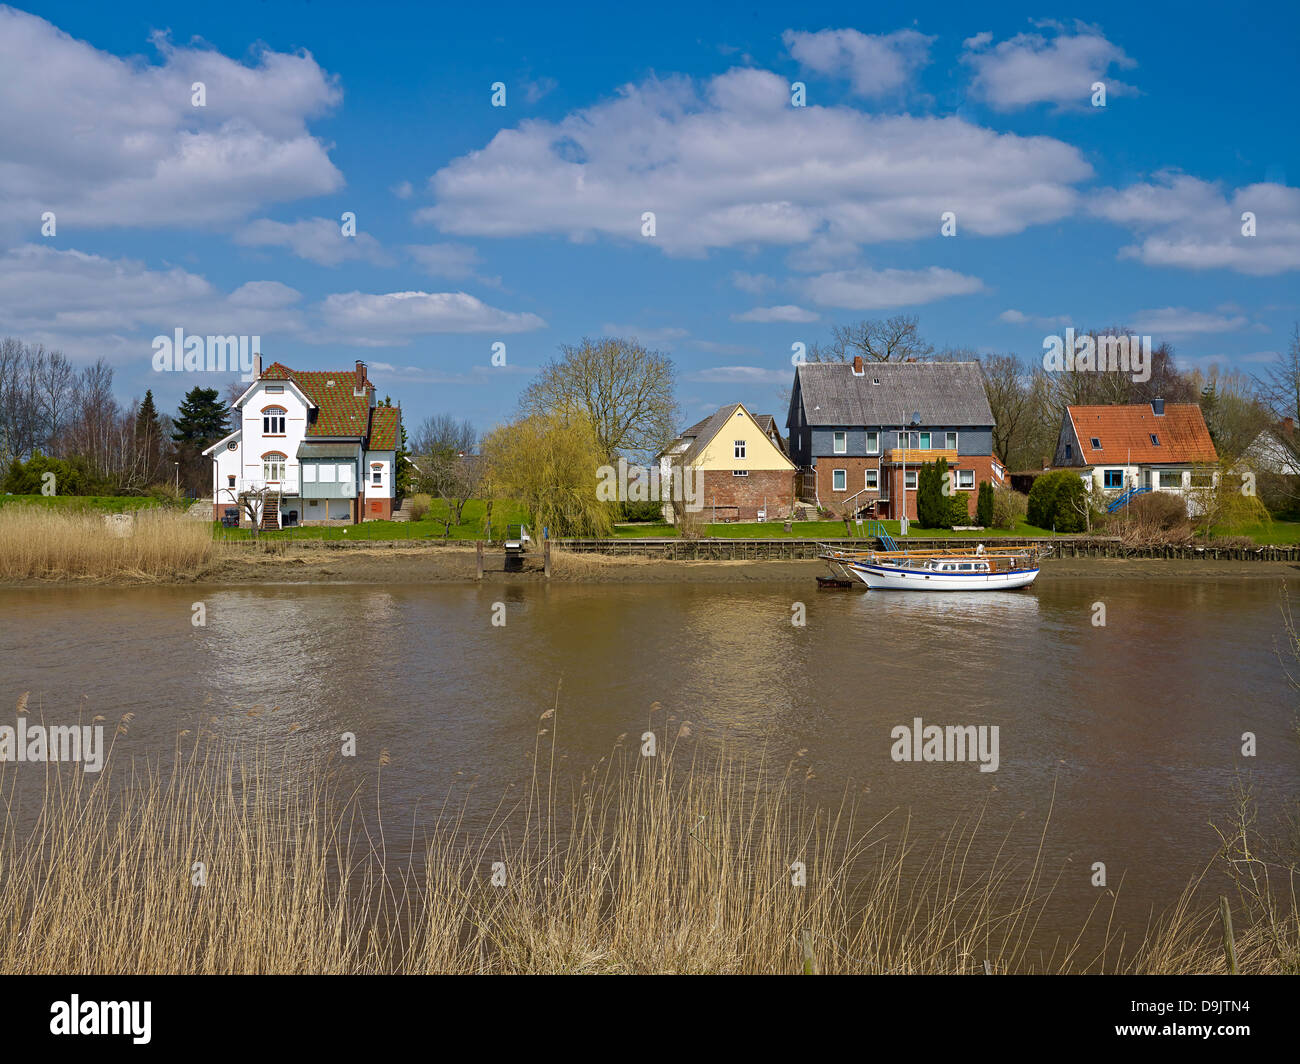 Houses of Osten at the Oste River, Hemmoor, Lower Saxony, Germany Stock Photo